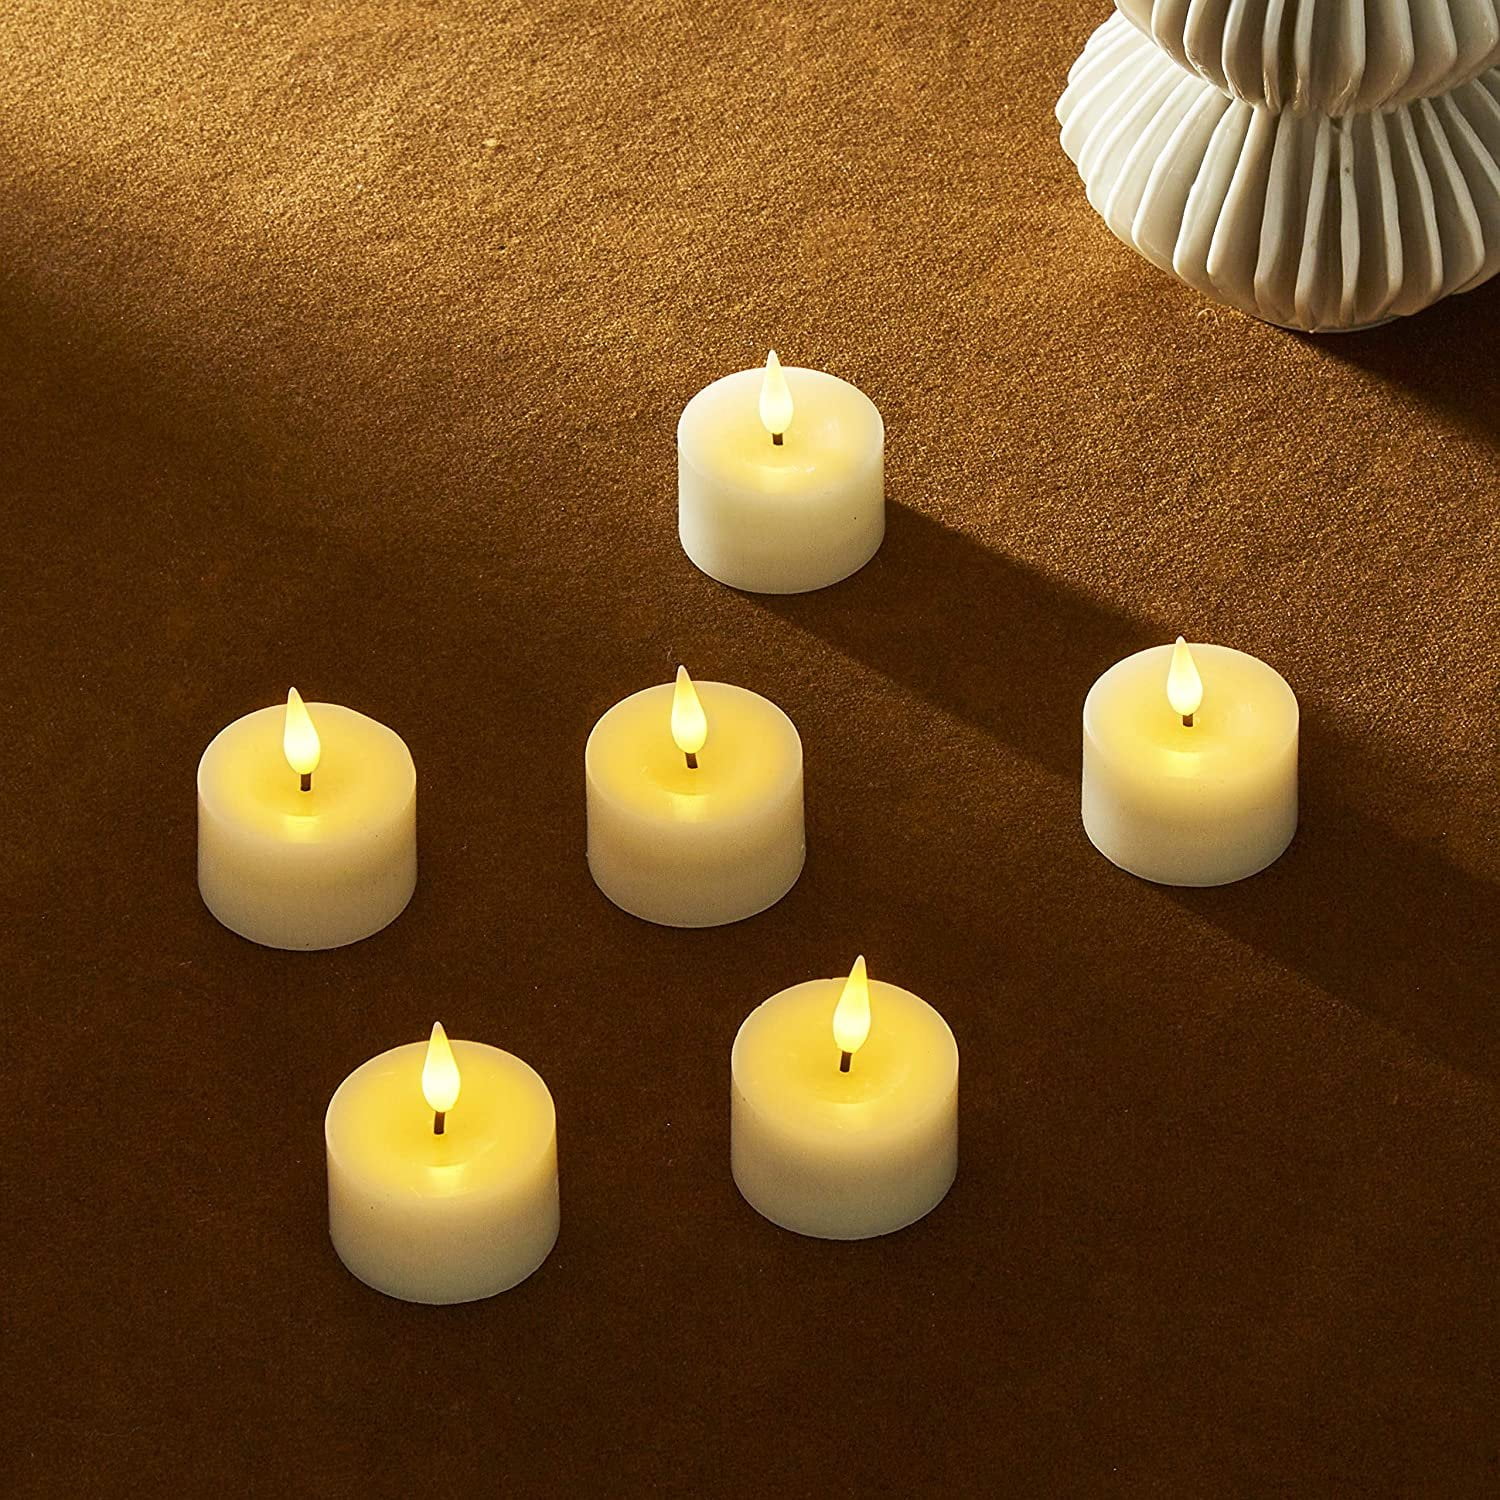 Paries Events Romantic Decorations Ivory 3 x 6 Etronic Real Wax 3D Dancing Flame Flickering Flameless Battery Powered LED Pillar Dripless Motion Candle for wedding